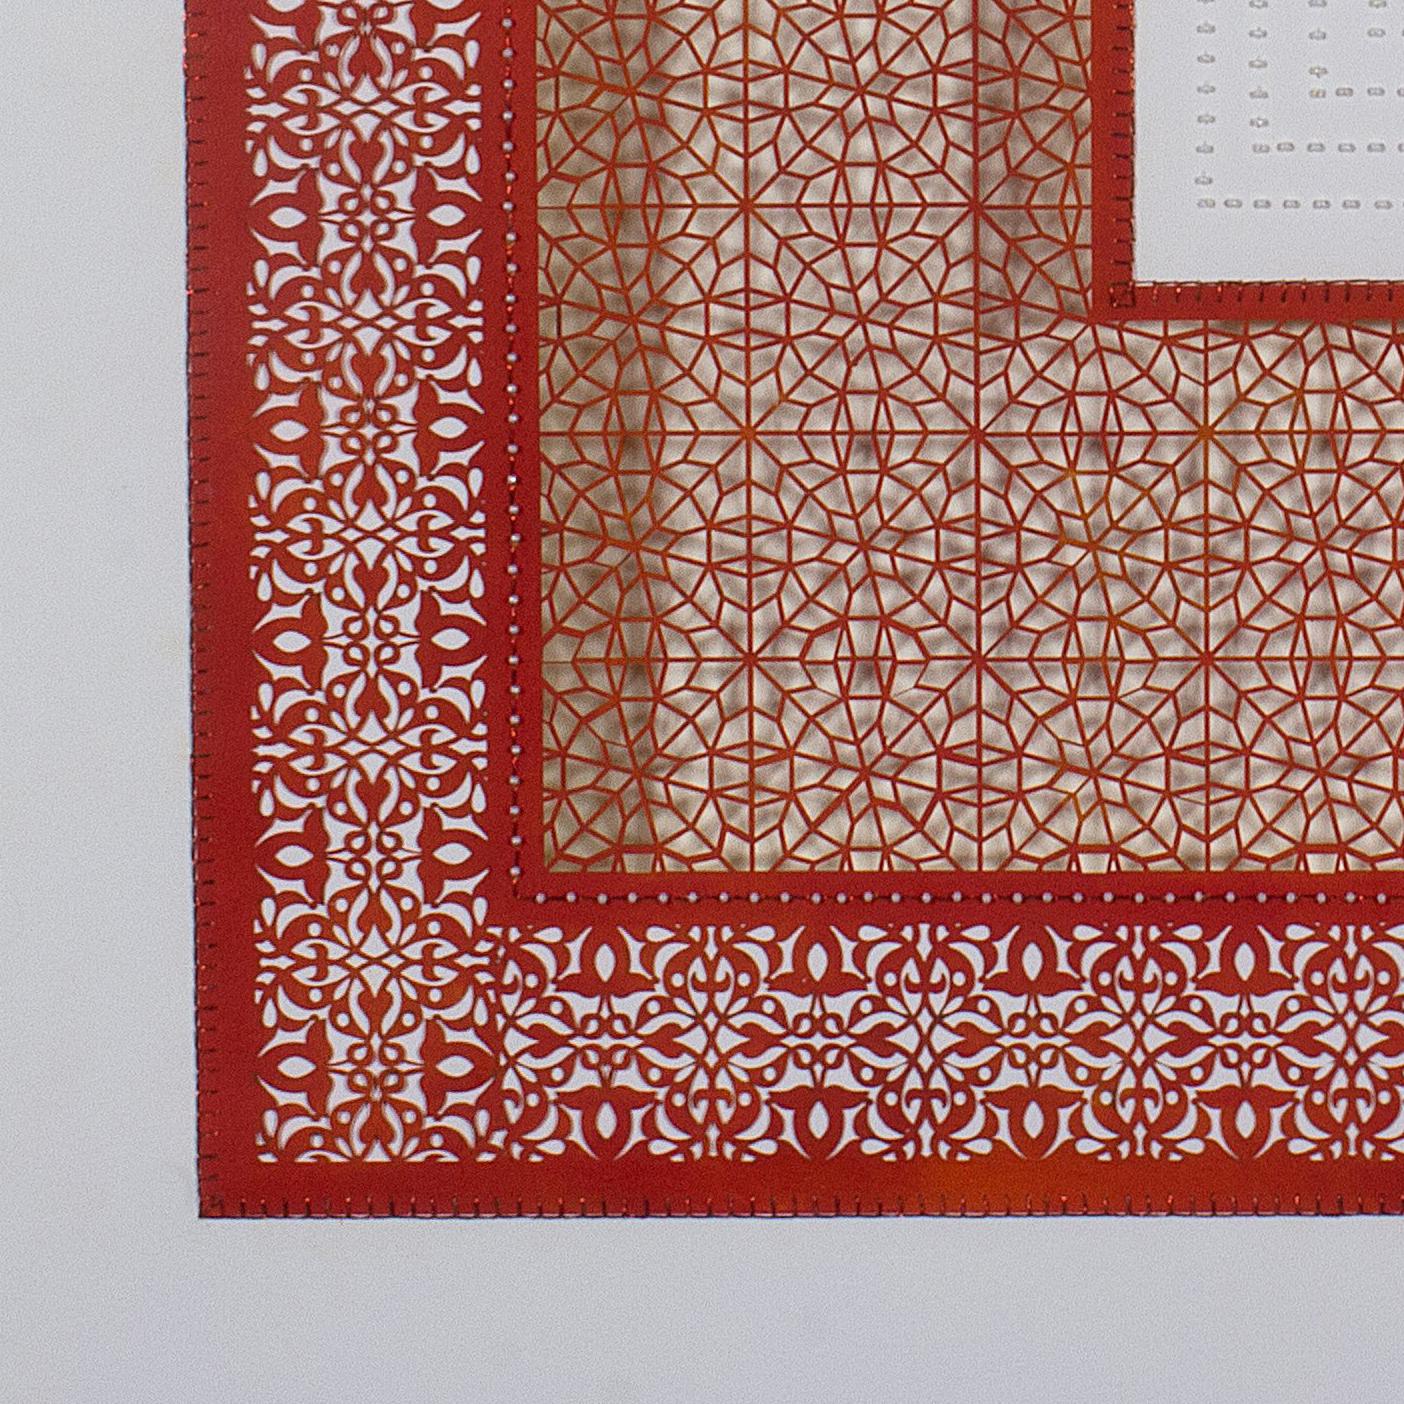 Anila Quayyum Agha
Flowers (Three Red Squares and One White), 2017
Mixed media on paper (red square with white beads in center square; second square cutout with no backing)
29.5 x 29.5 inches
75 x 75 cm

Anila Quayyum Agha examines issues of global